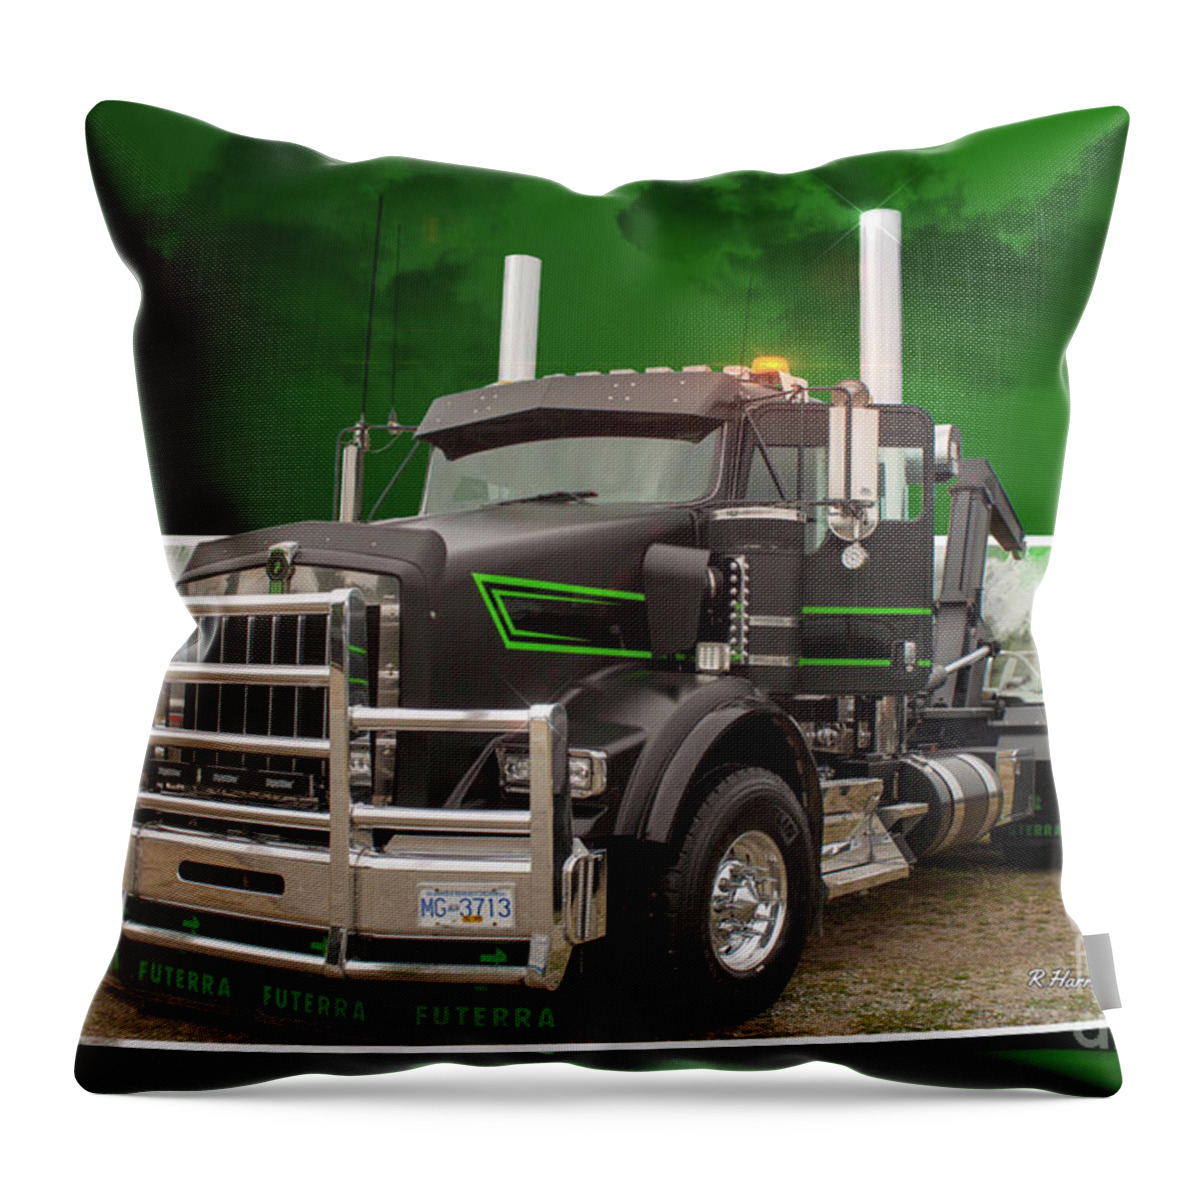 Big Rigs Throw Pillow featuring the photograph Catr9415-19 by Randy Harris